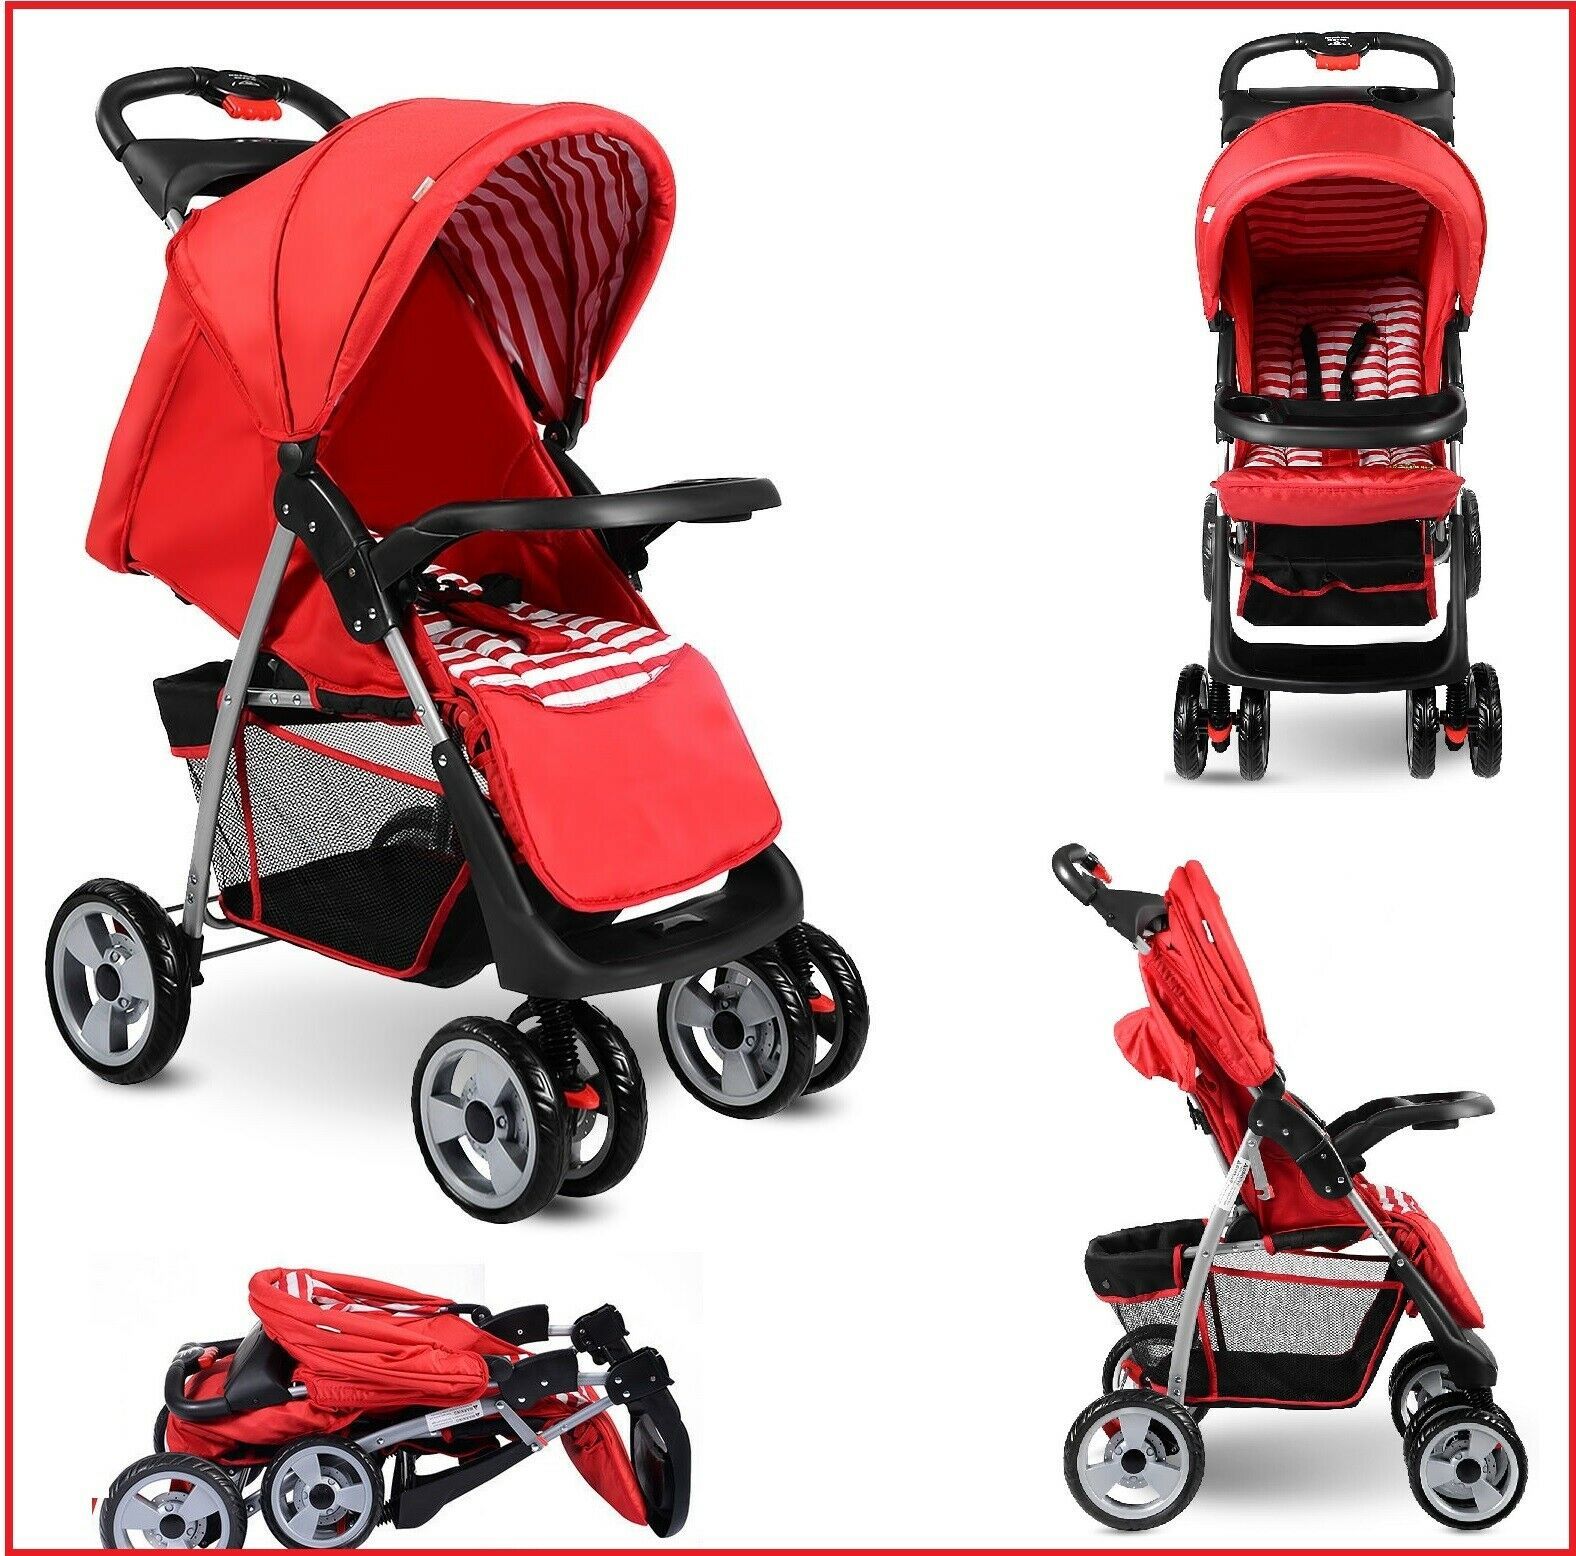 Red Travel Stroller Foldable Lightweight Kids Pushchair Toddler Compact ...